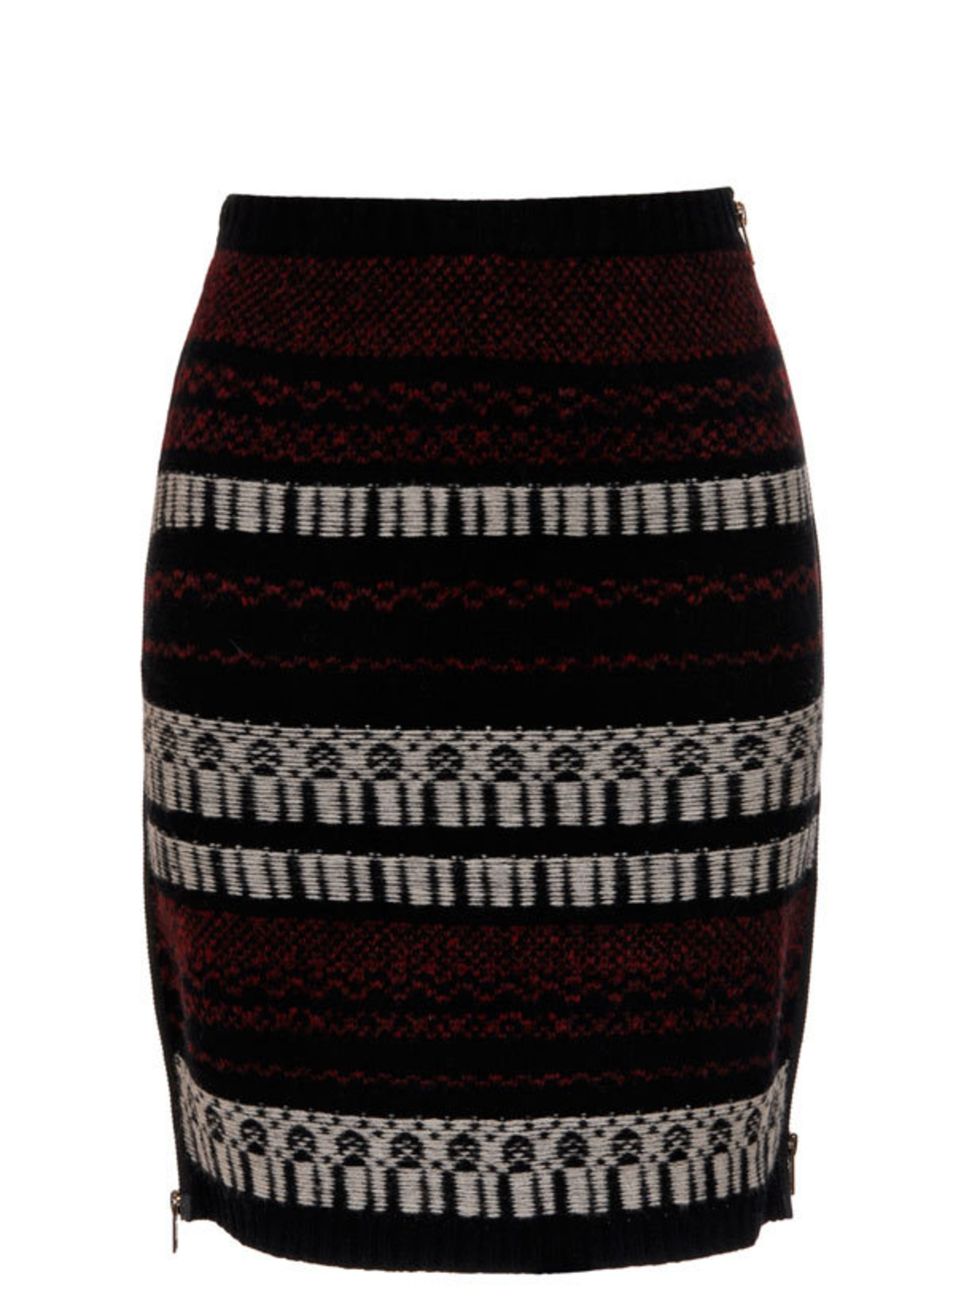 <p>Edun sweater skirt, £180, at <a href="http://www.brownsfashion.com/Product/Women/Women/Clothing/Skirts/Wool_and_cashmere-blend_sweater_skirt/Product.aspx?p=3211111&amp;pc=1949753&amp;cl=4">Browns Fashion</a></p>